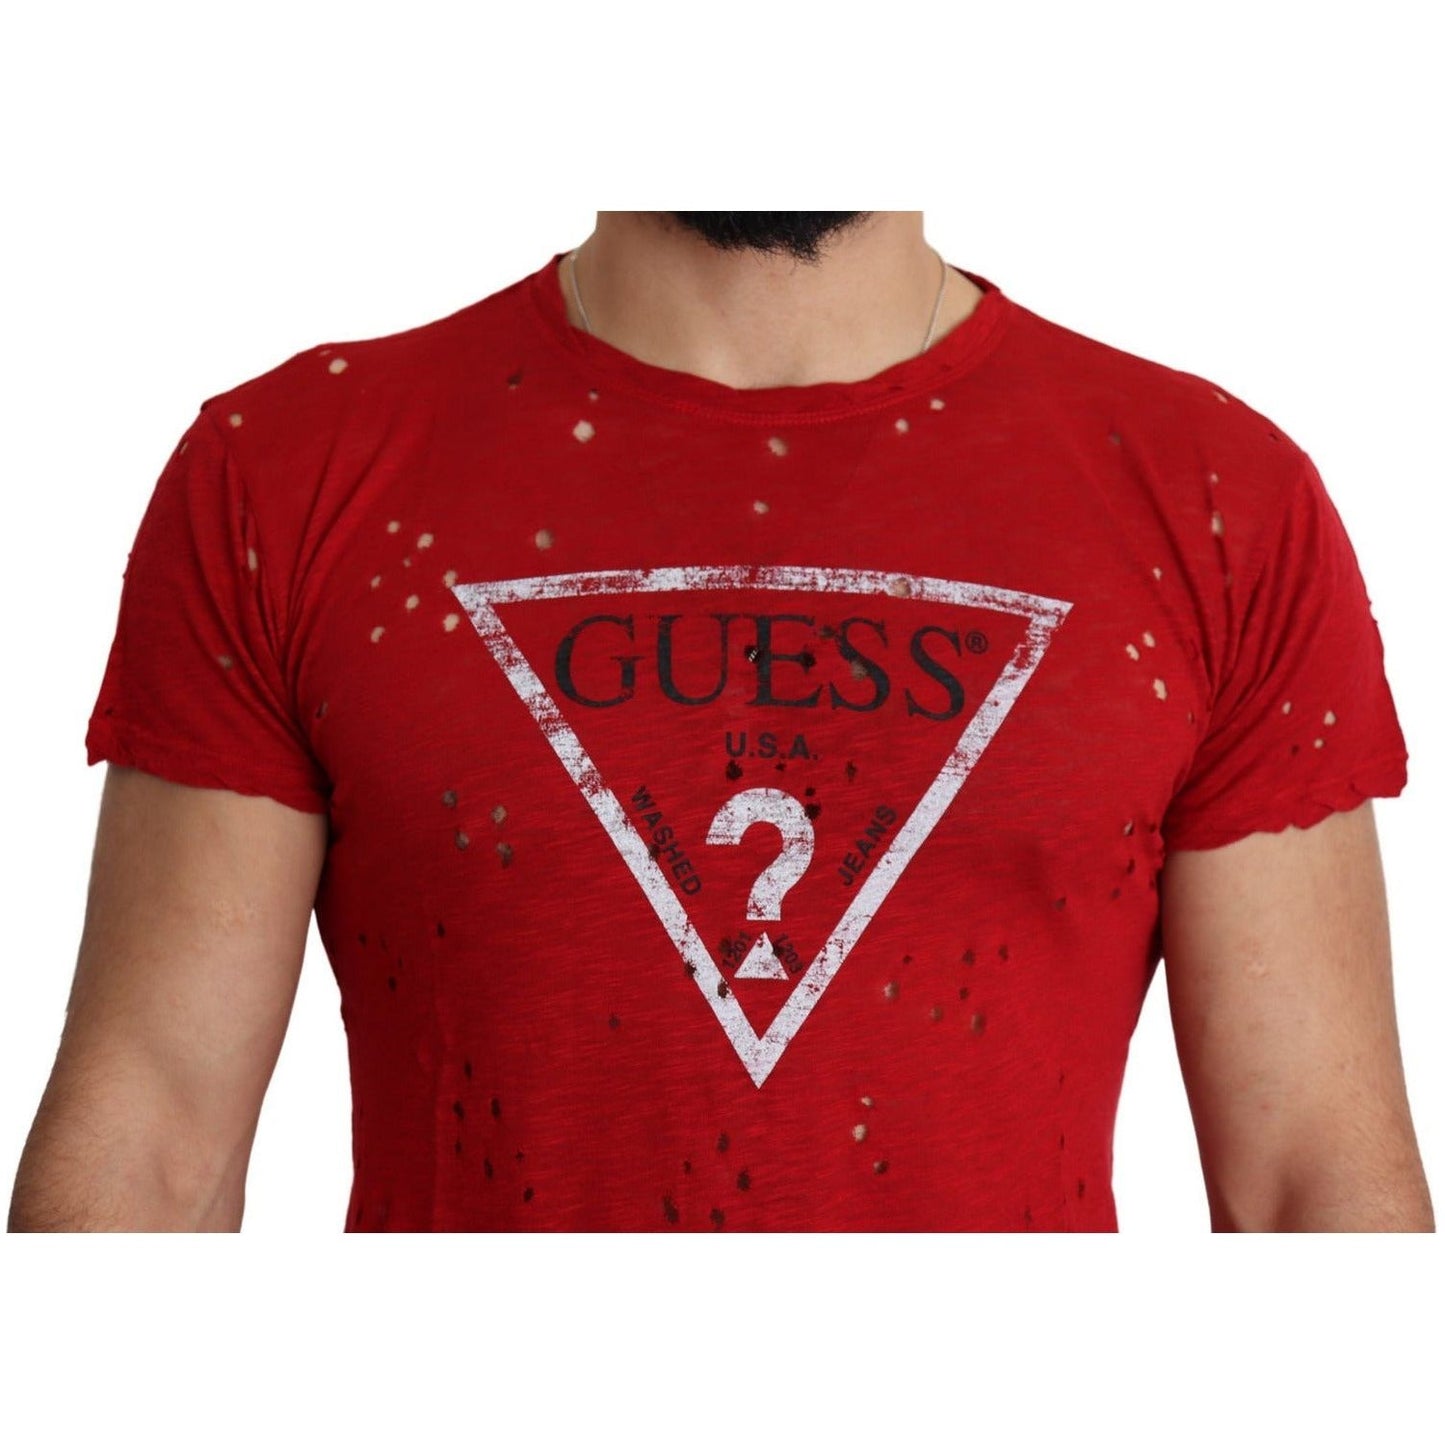 Guess Radiant Red Cotton Stretch T-Shirt red-cotton-logo-print-men-casual-top-perforated-t-shirt